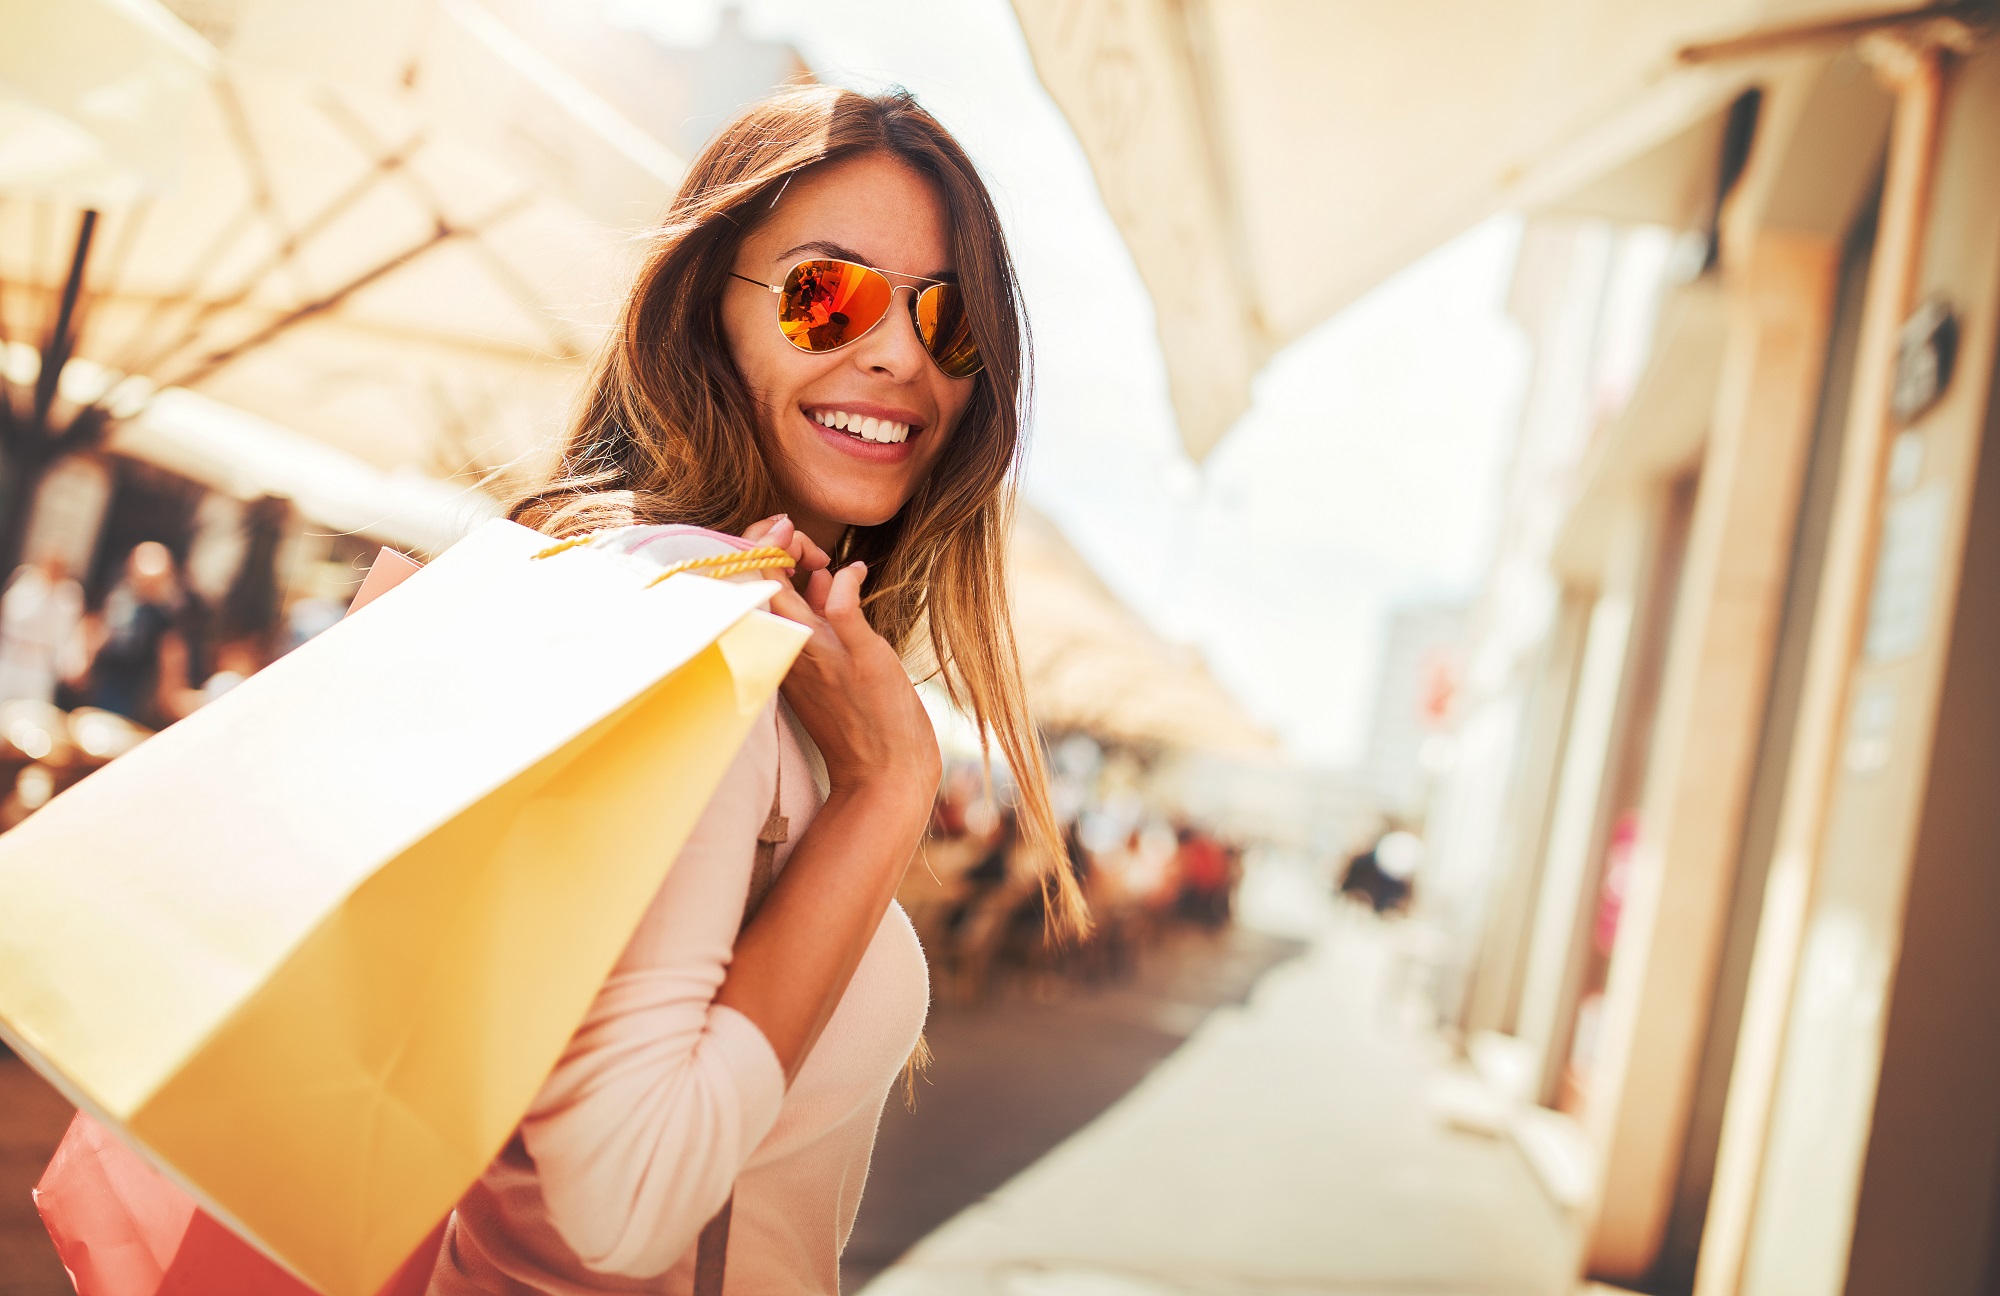 Woman in shades smiling holding shopping bags down mall strip